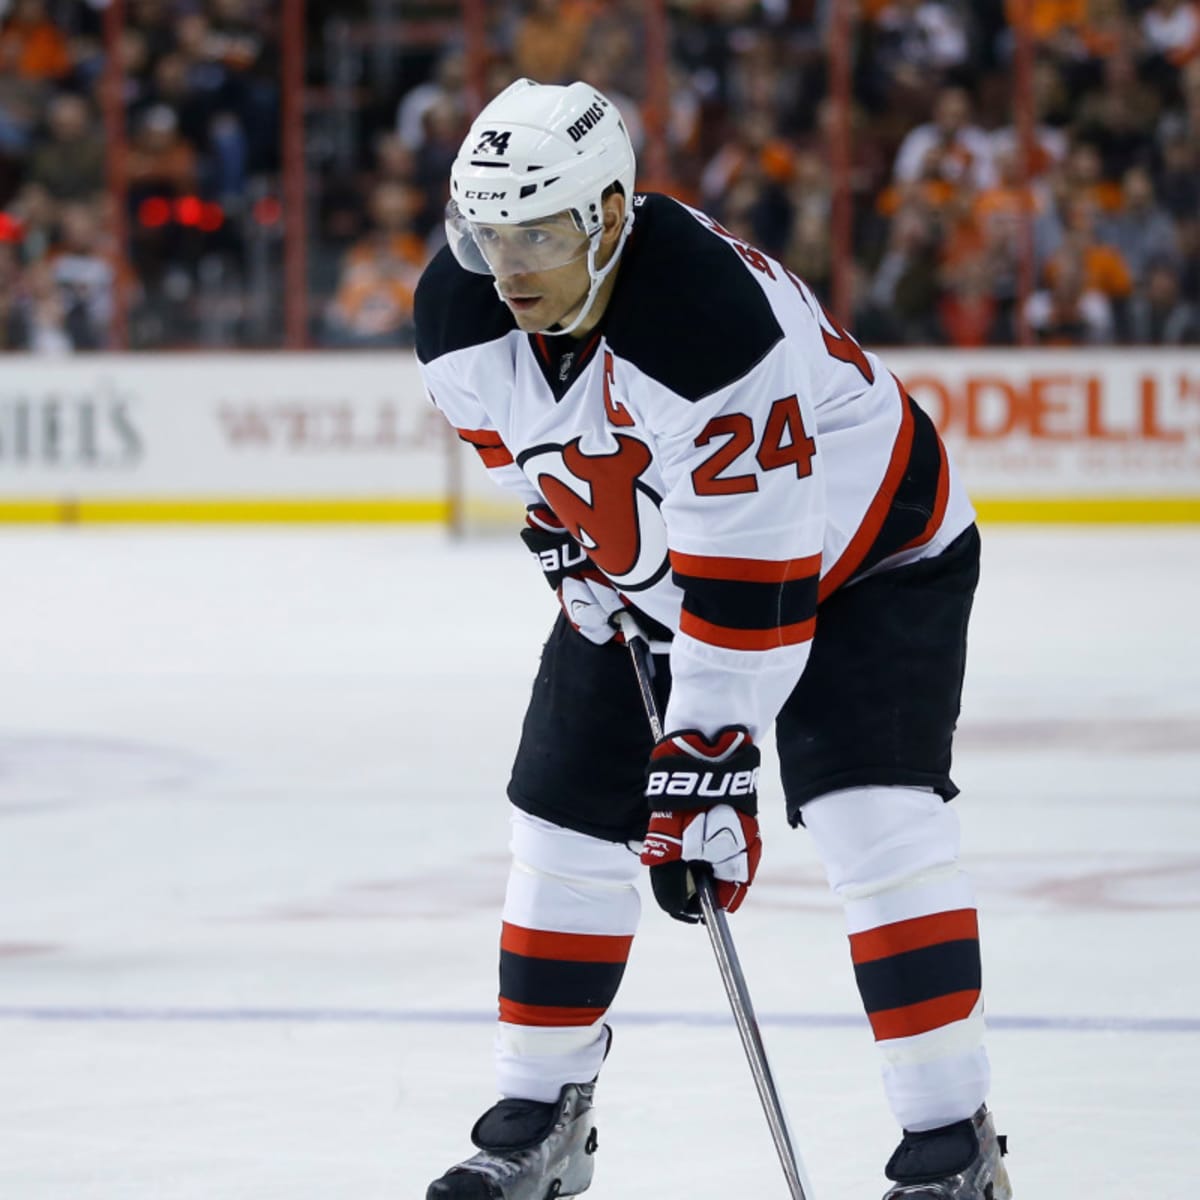 BRYCE SALVADOR RETIRES FROM NHL AFTER 14 SEASONS